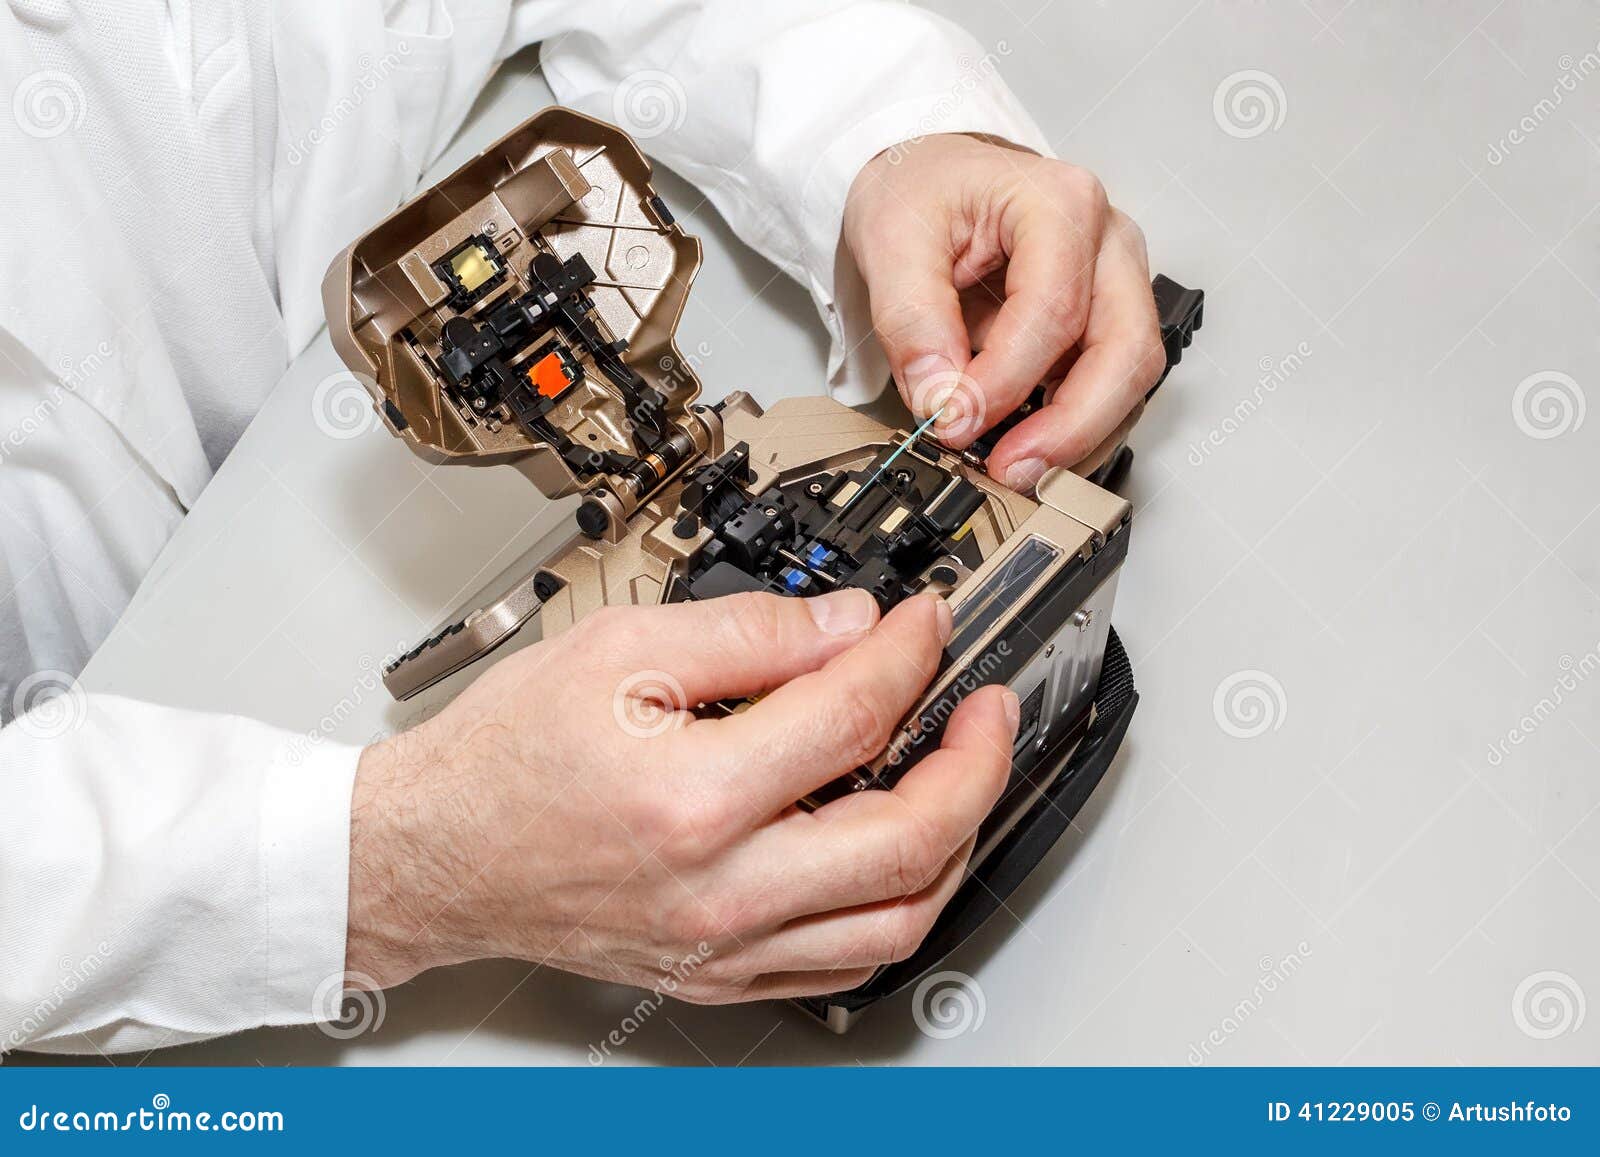 Working With Fiber Optic Fusion Splicer Stock Image - Image of gigabyte